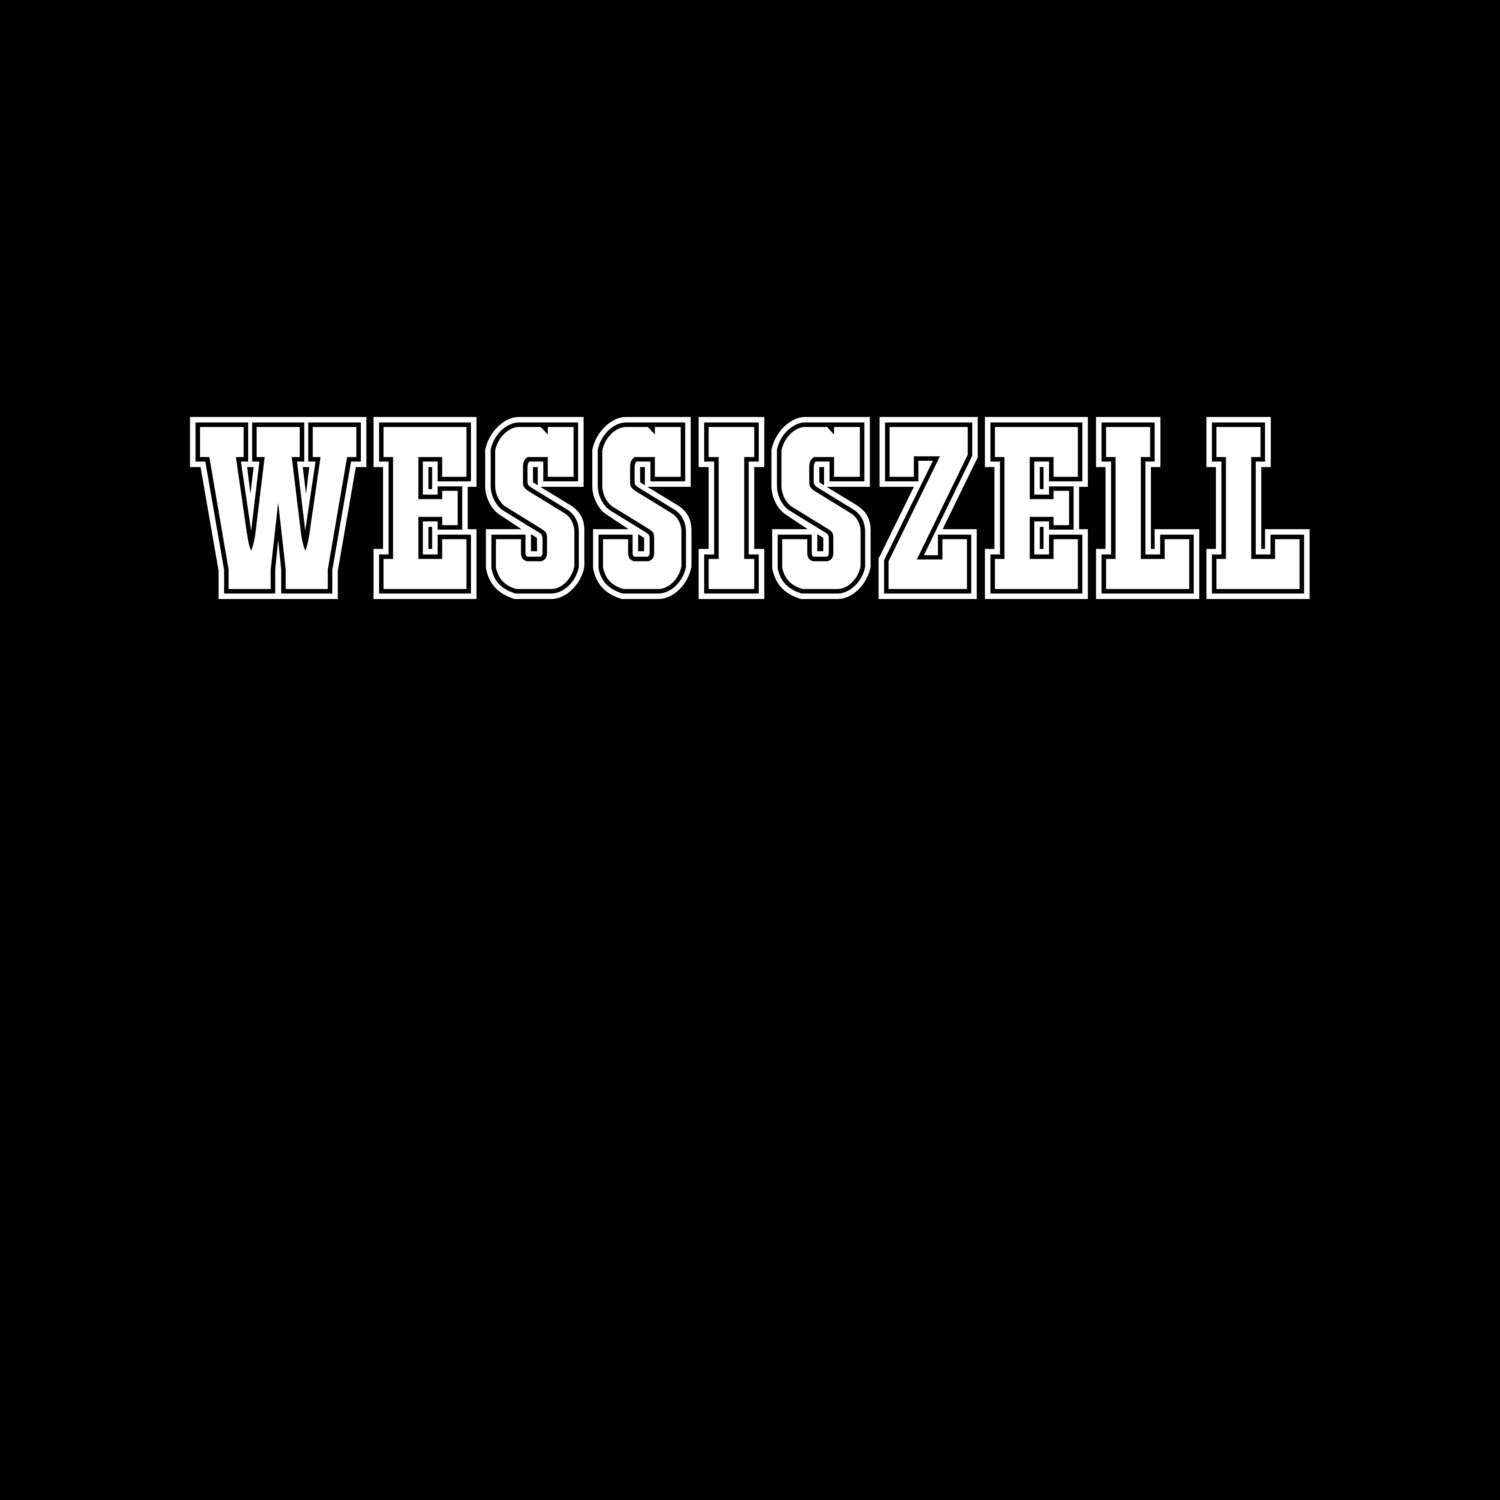 Wessiszell T-Shirt »Classic«